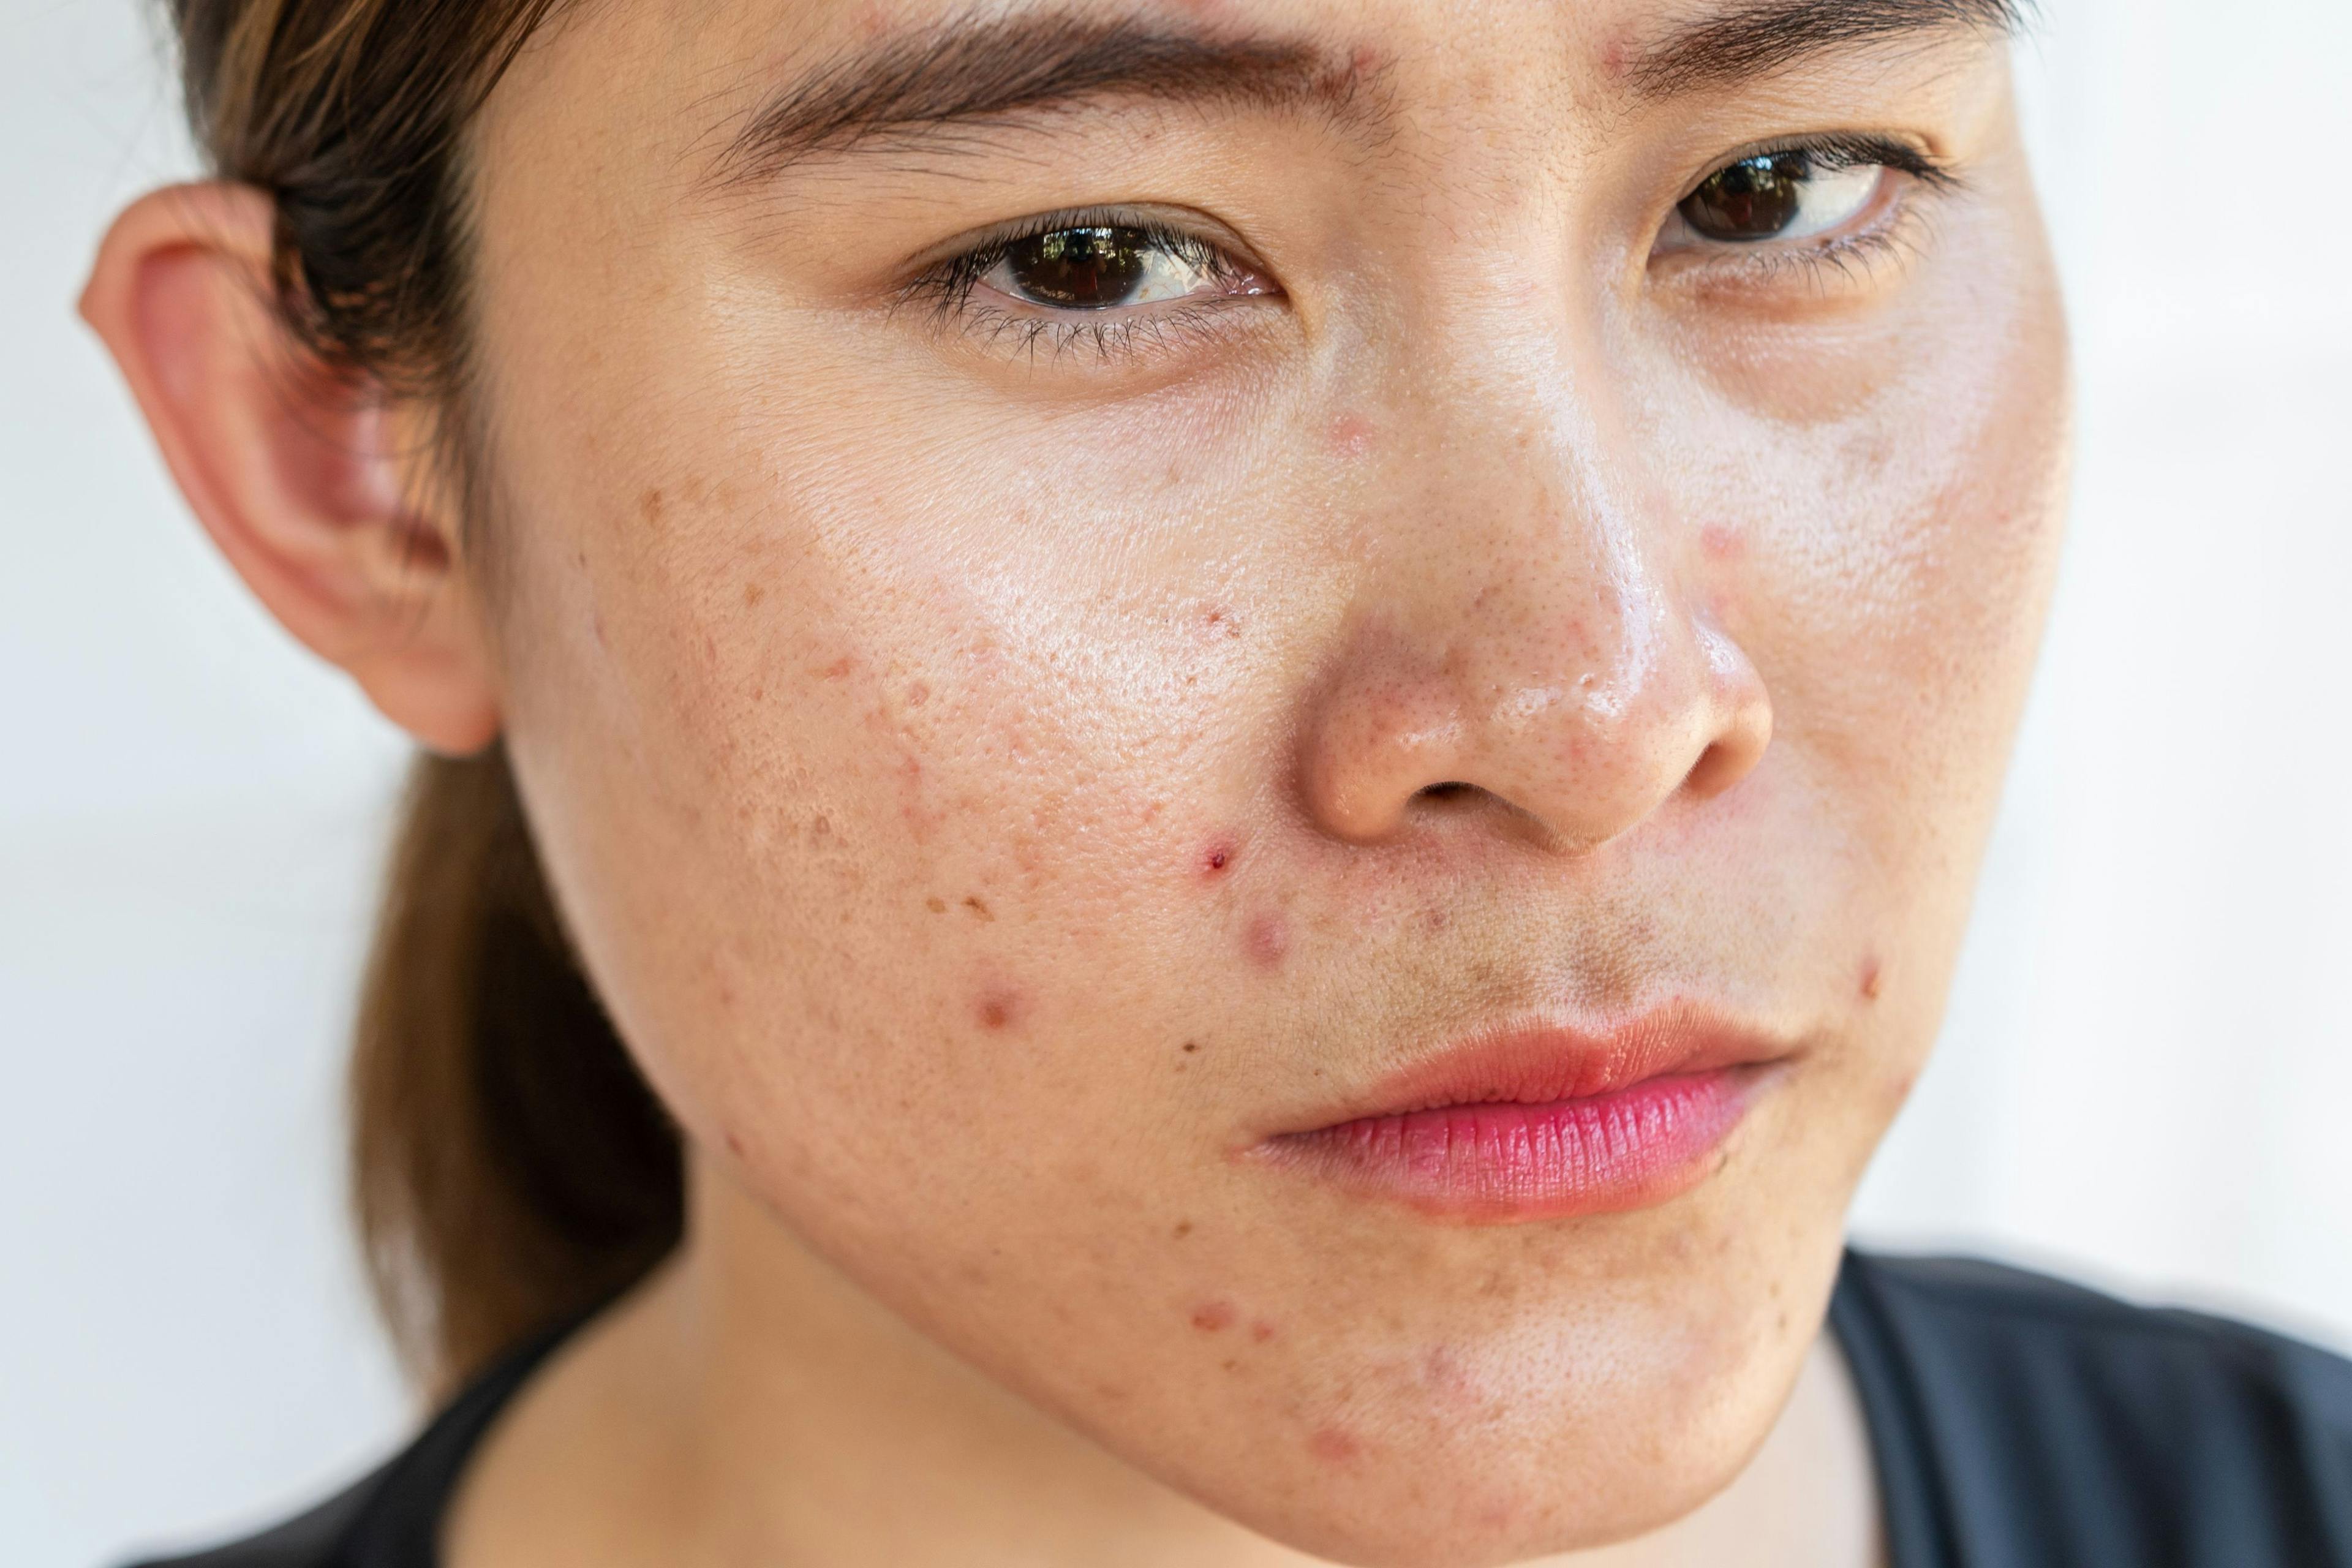 Ceramide-Containing Skin Care May Improve Prescription Acne Treatment Adherence 